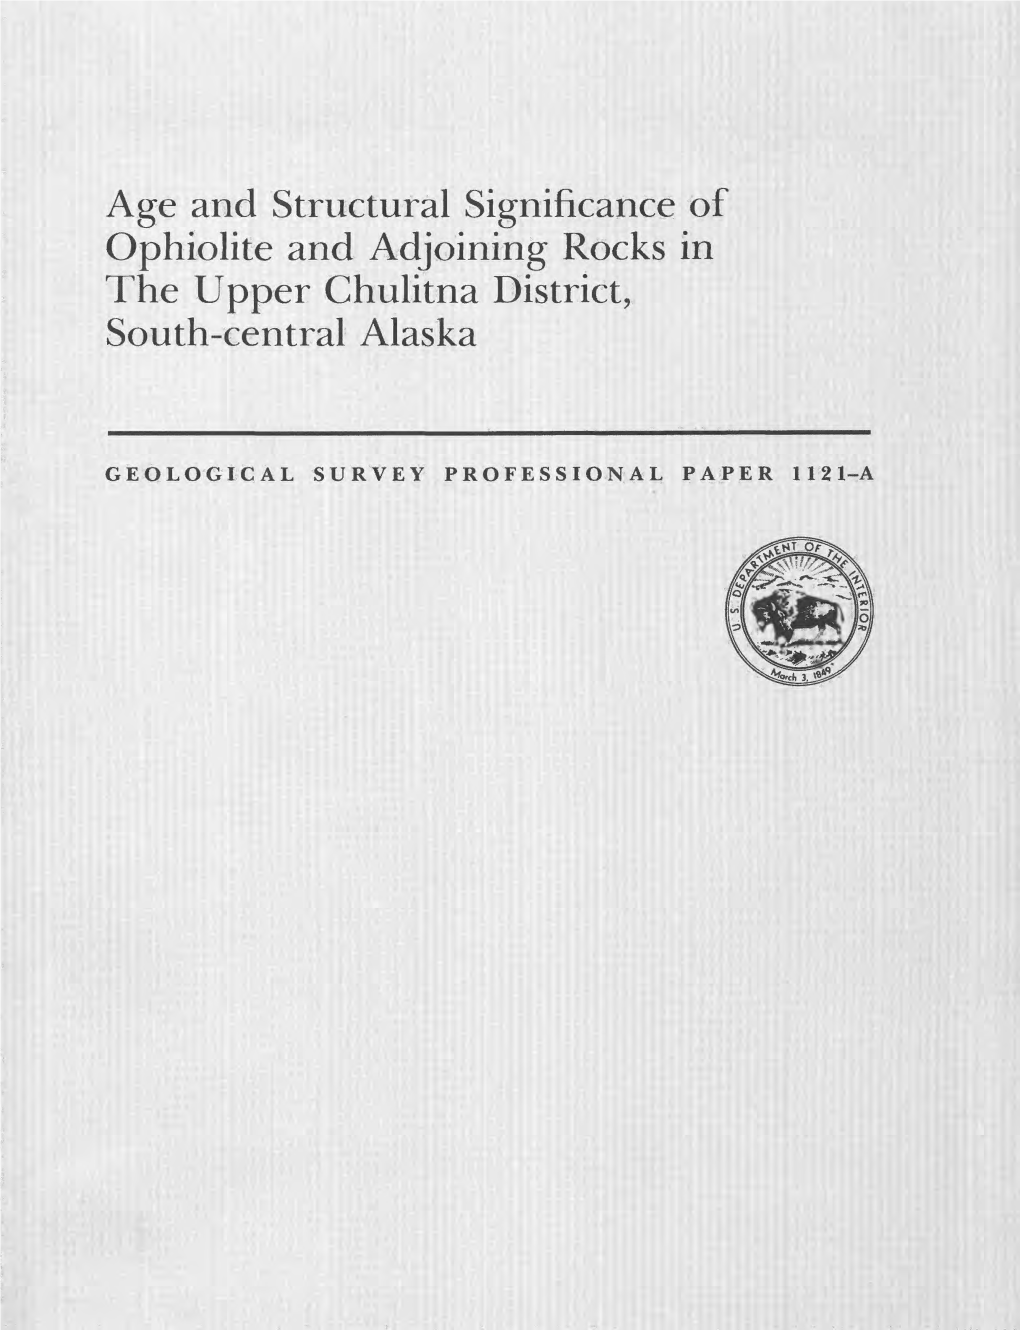 Age and Structural Significance of Ophiolite and Adjoining Rocks in the Upper Chulitna District, South-Central Alaska